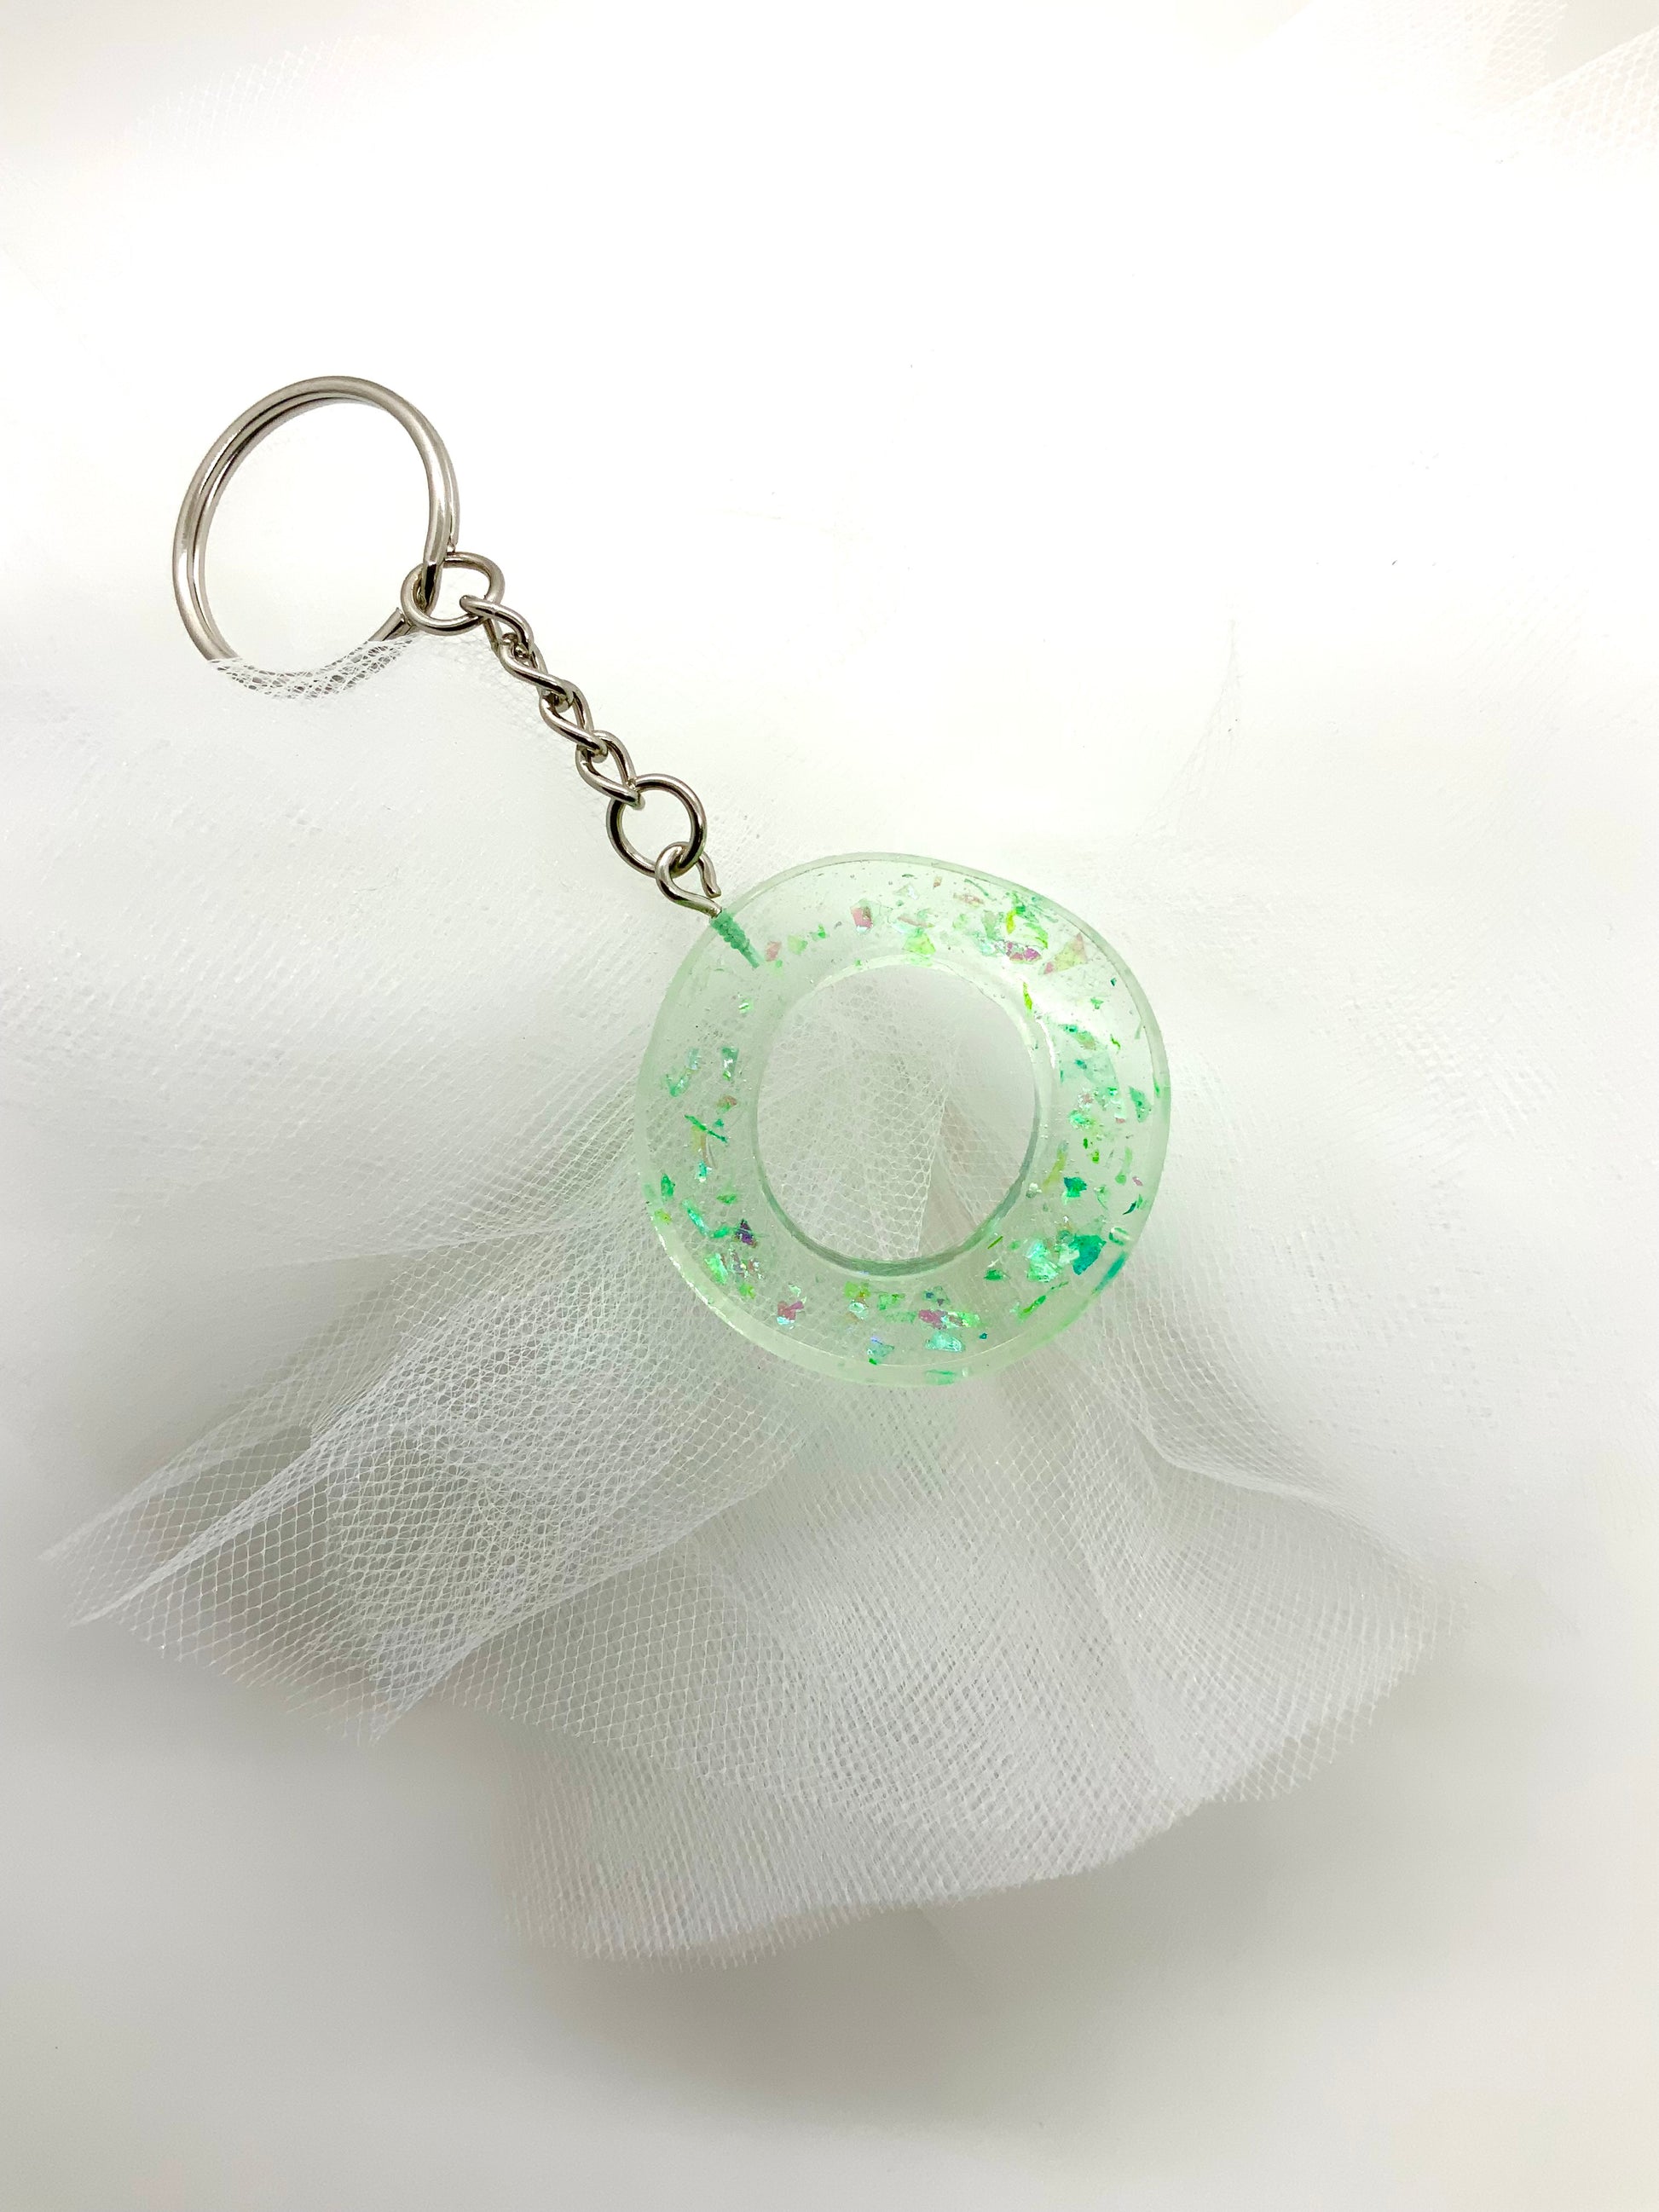 The Letter "O" Keychain - BeautiesbyHand